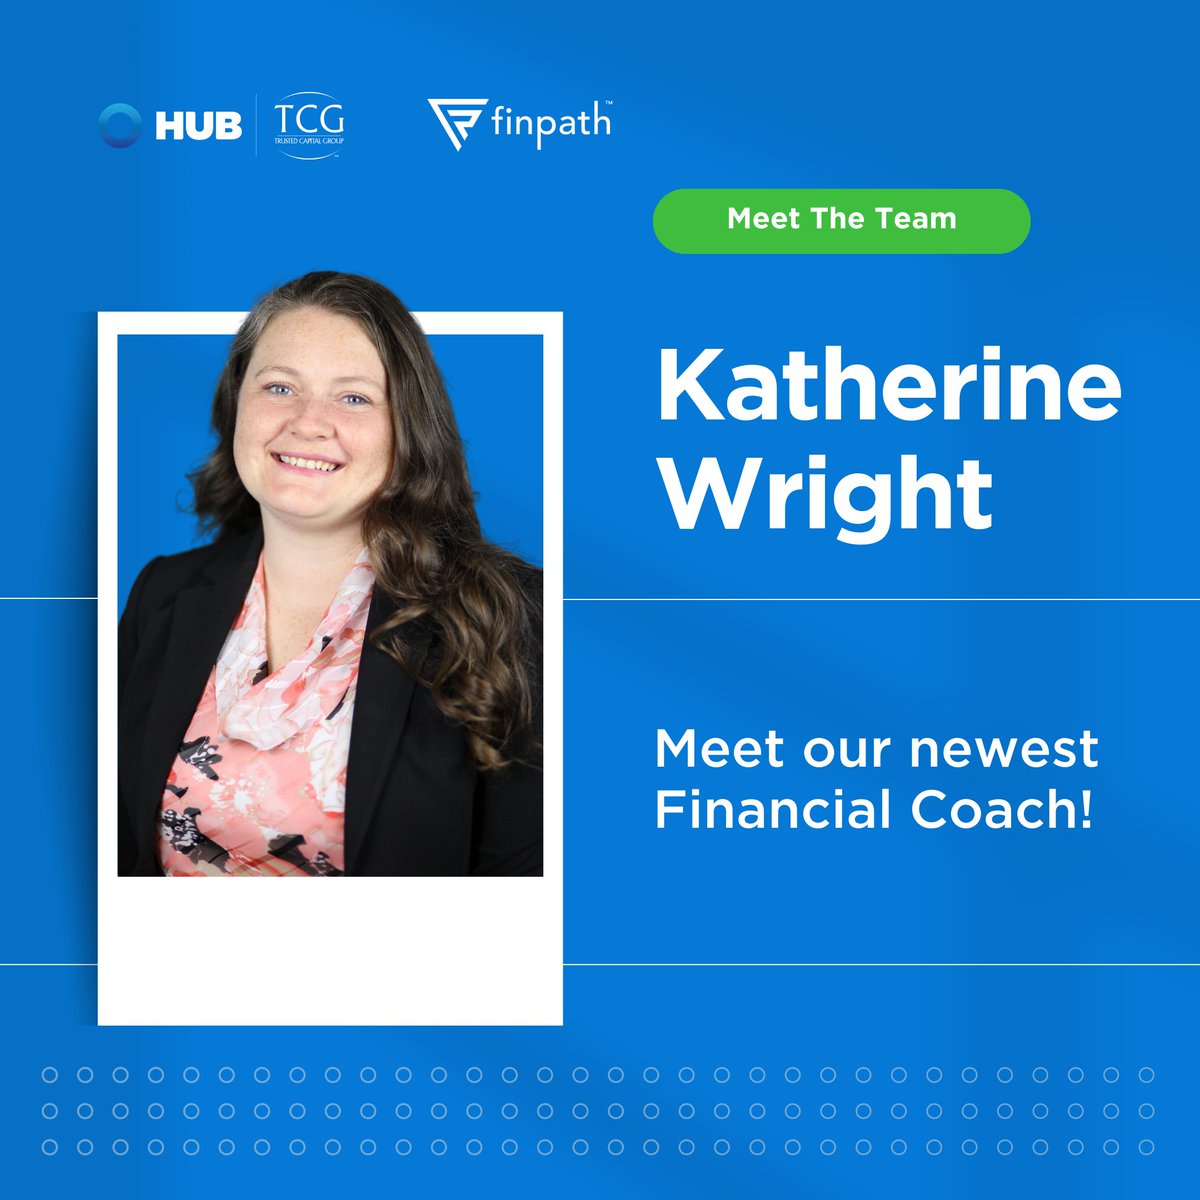 Meet Katherine Wright - our newest Financial Coach! Katherine is passionate about finance and enjoys teaching others about the best practices for maintaining financial health. We're so excited to have her on our team!
.
.
.
#ReadyForTomorrow #FinancialCoach #FinancialHealth